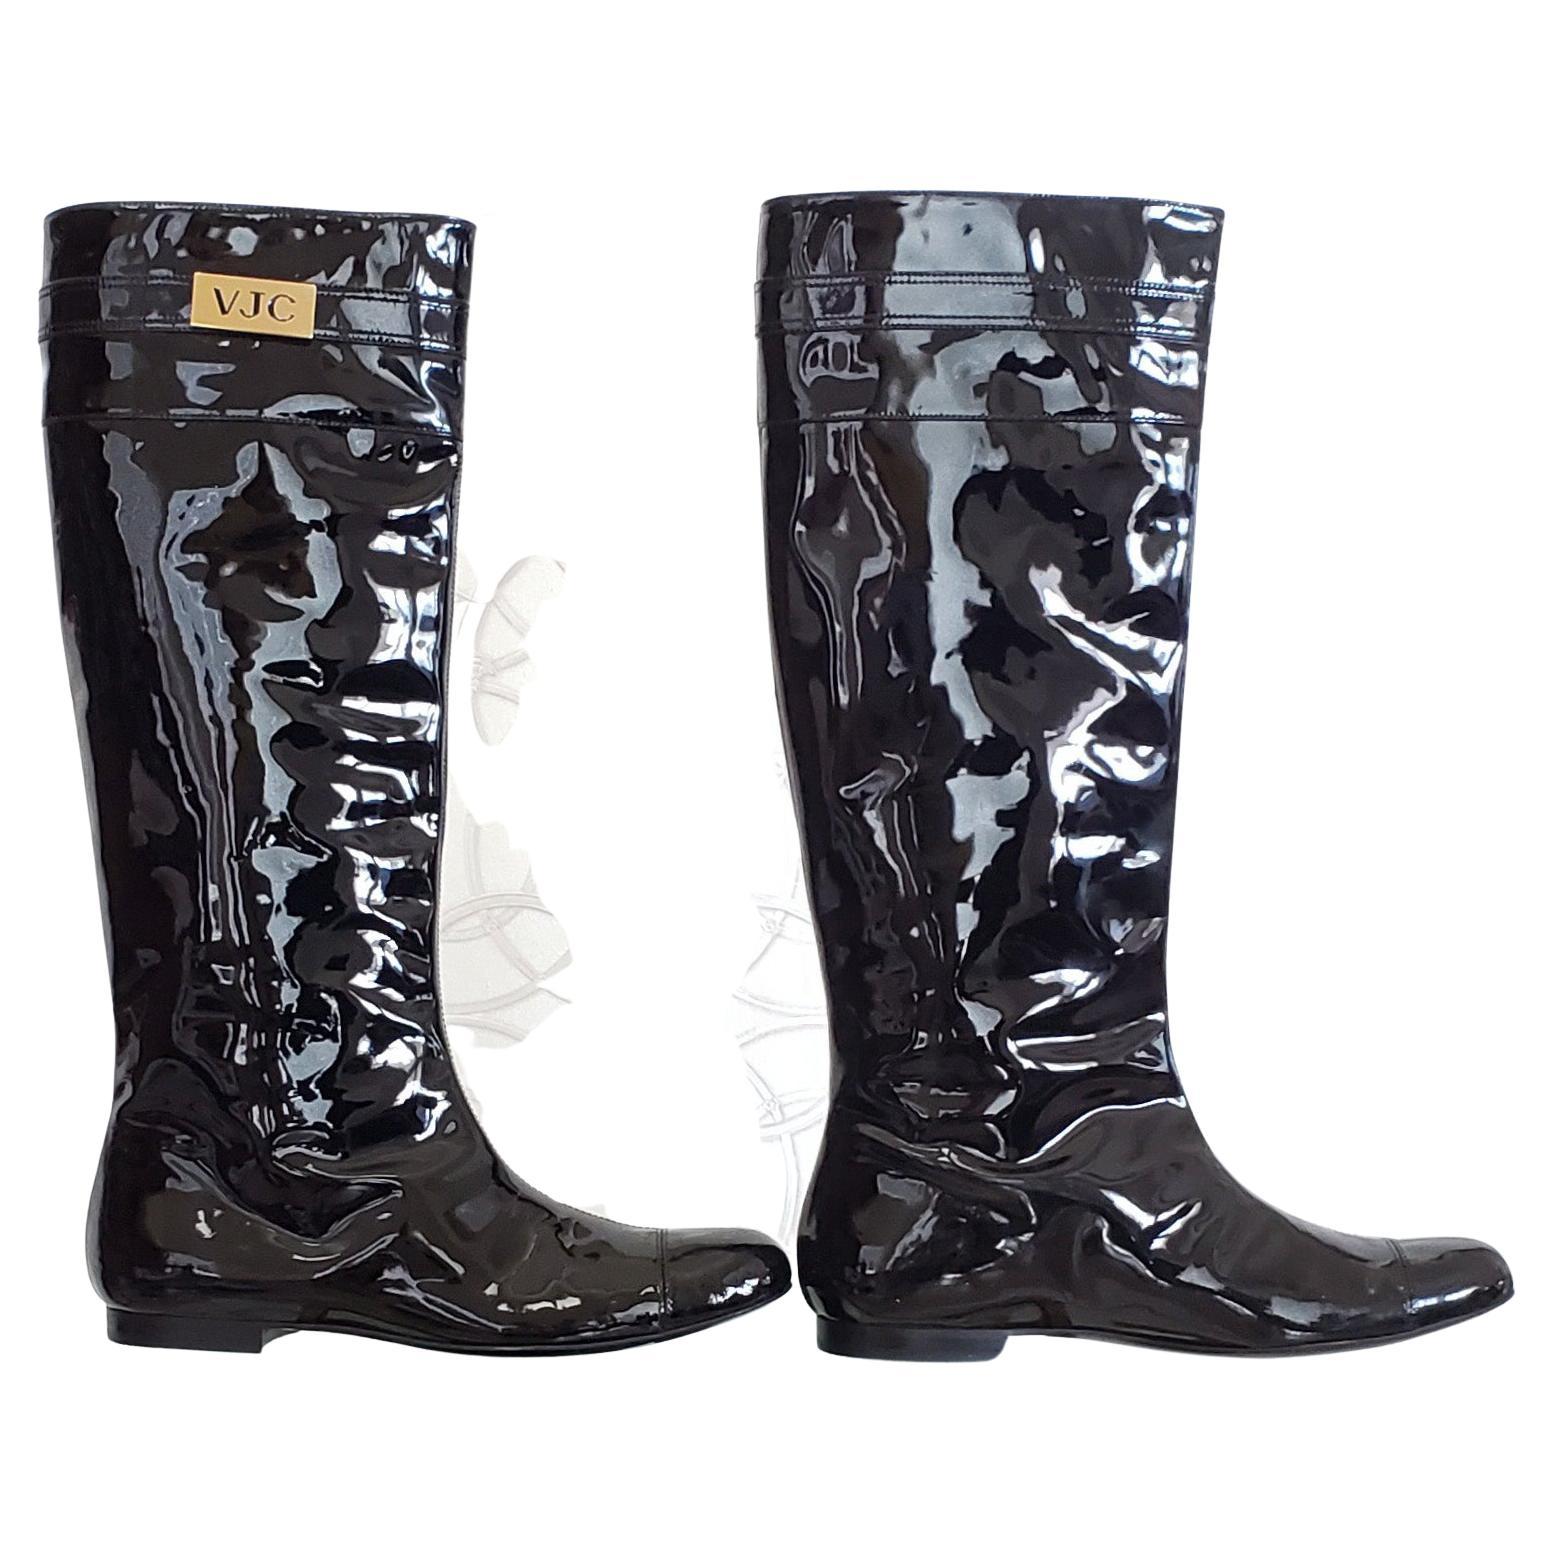 New VERSACE VJC BLACK PATENT LEATHER BOOTS 39 - 9 For Sale